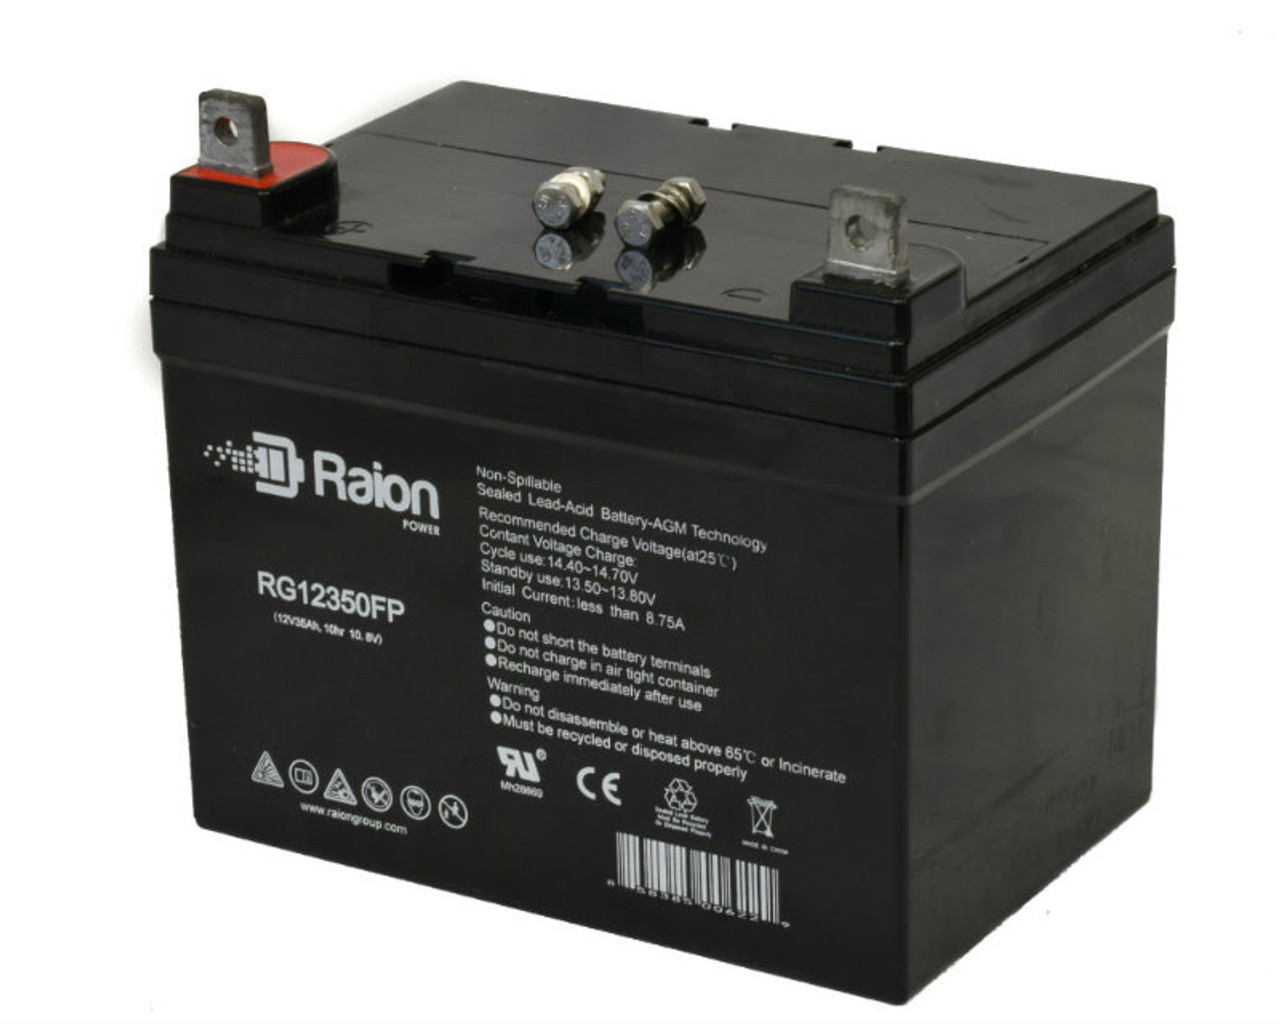 Raion Power Replacement 12V 35Ah Battery for Wheel Horse 11-38 - 1 Pack